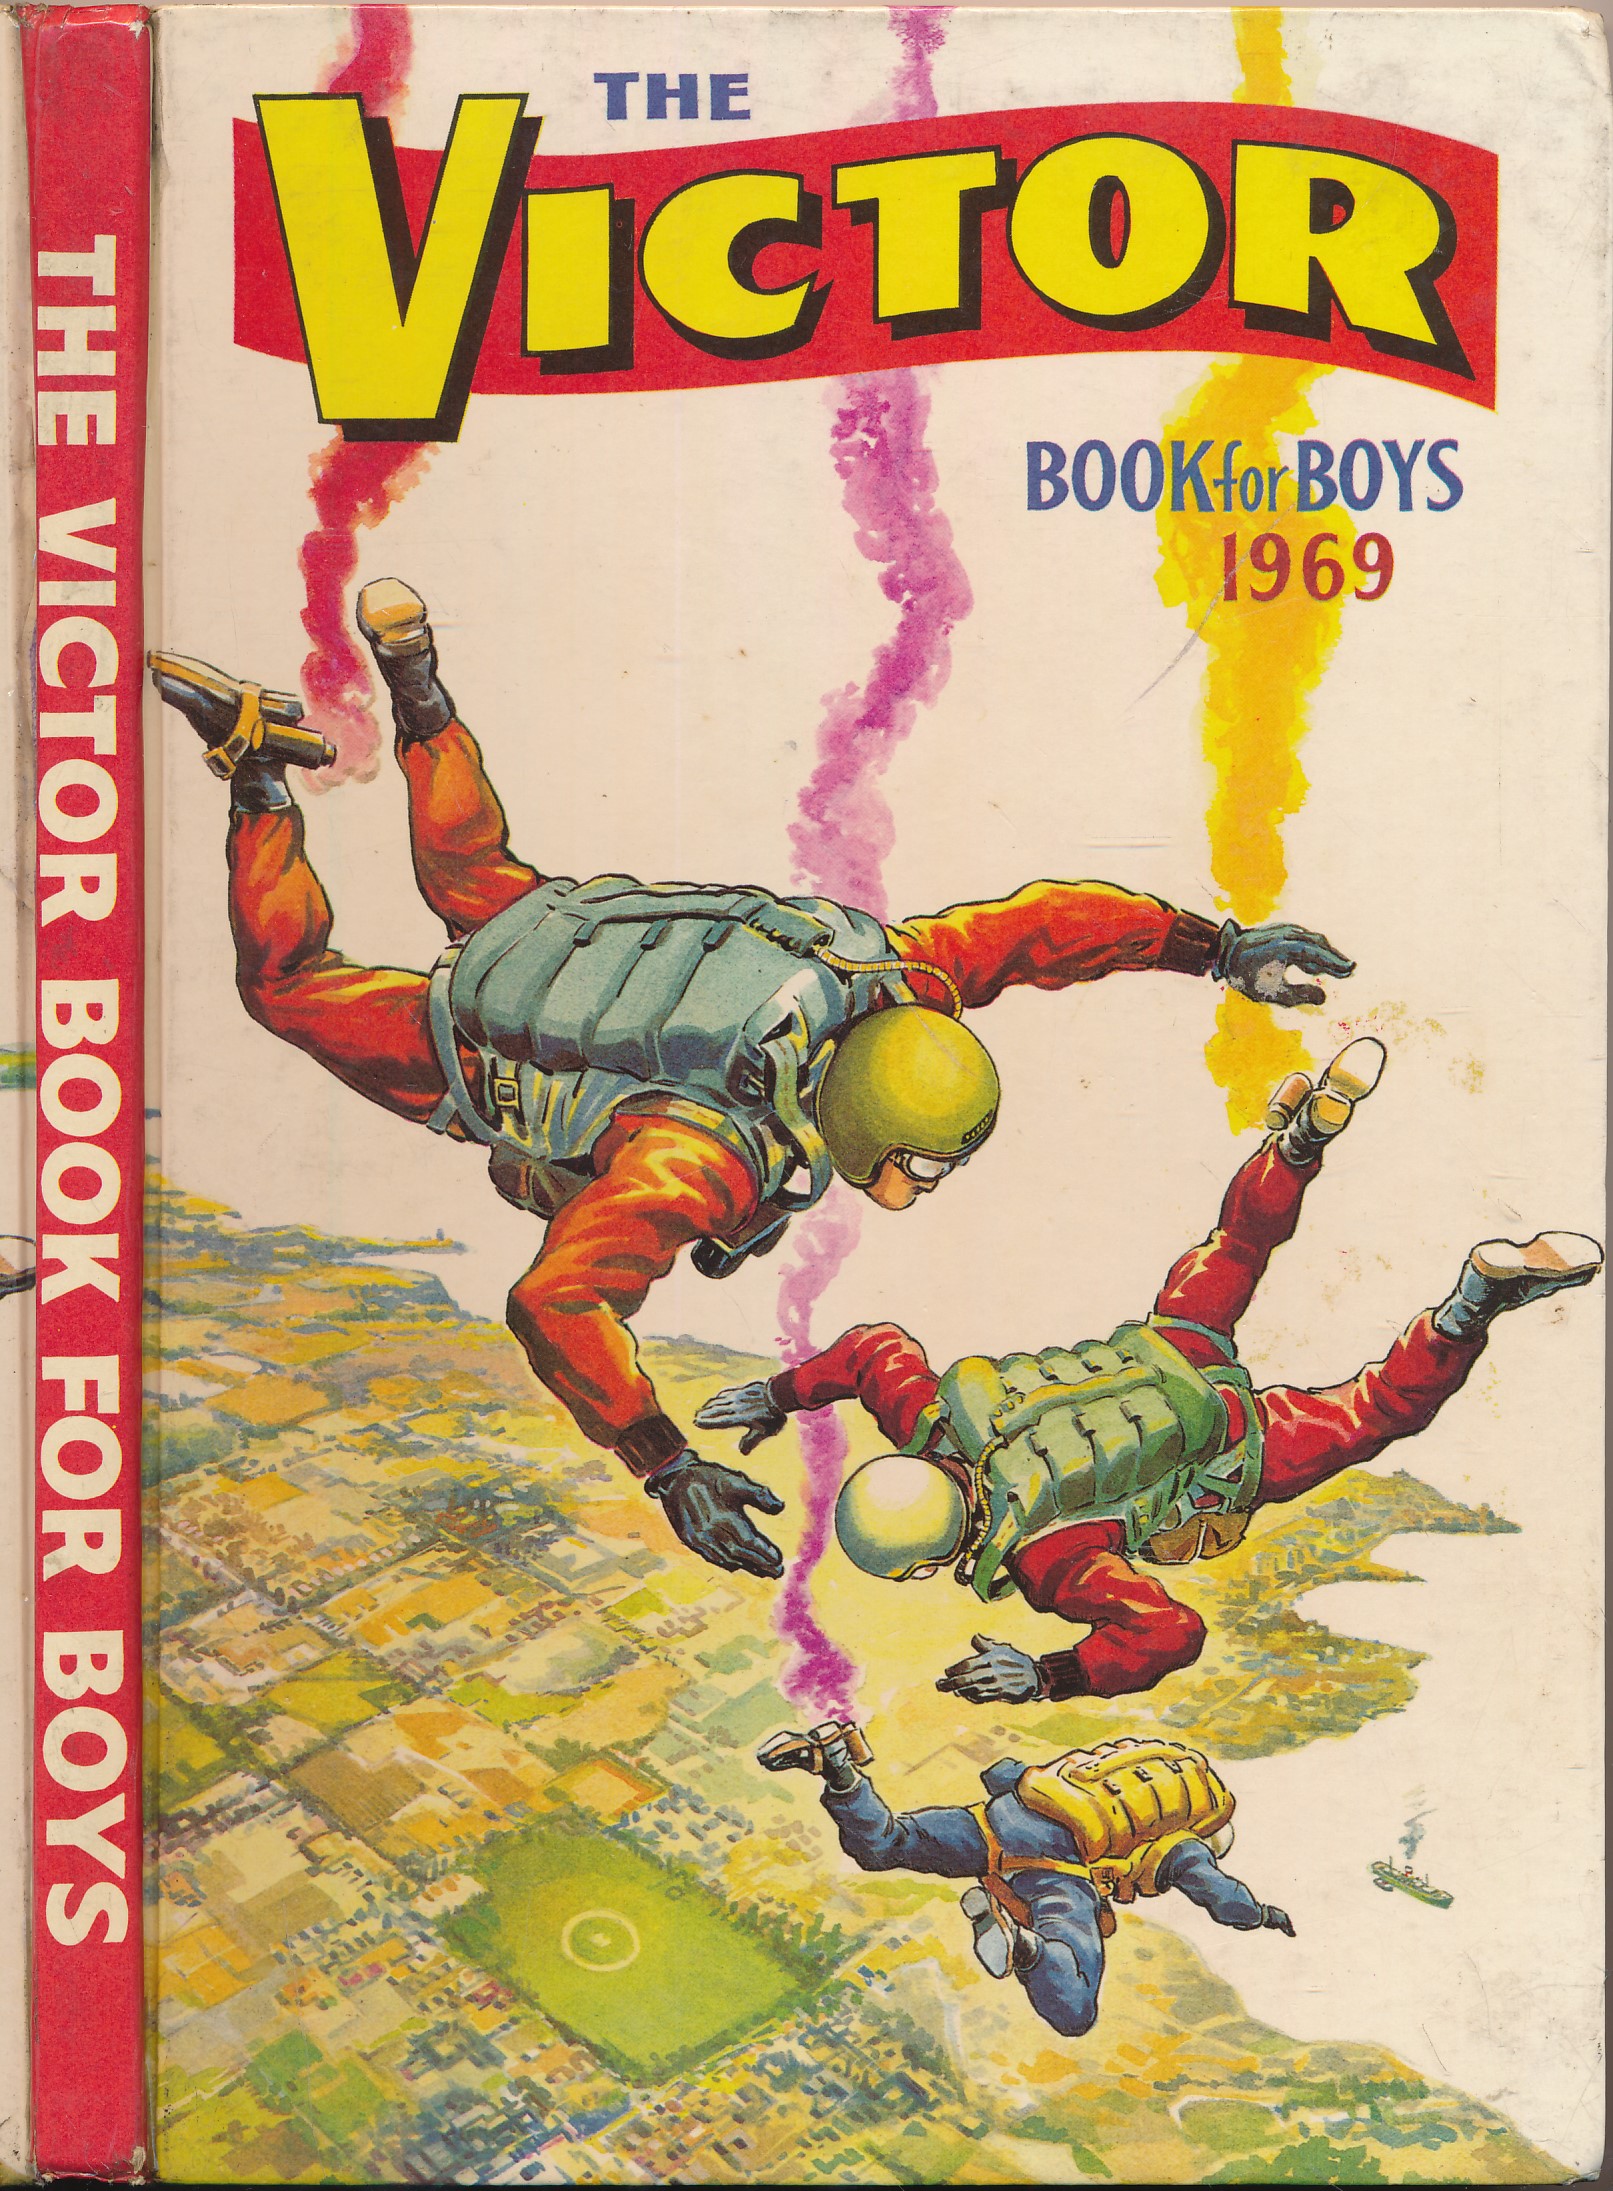 The Victor Book for Boys 1969